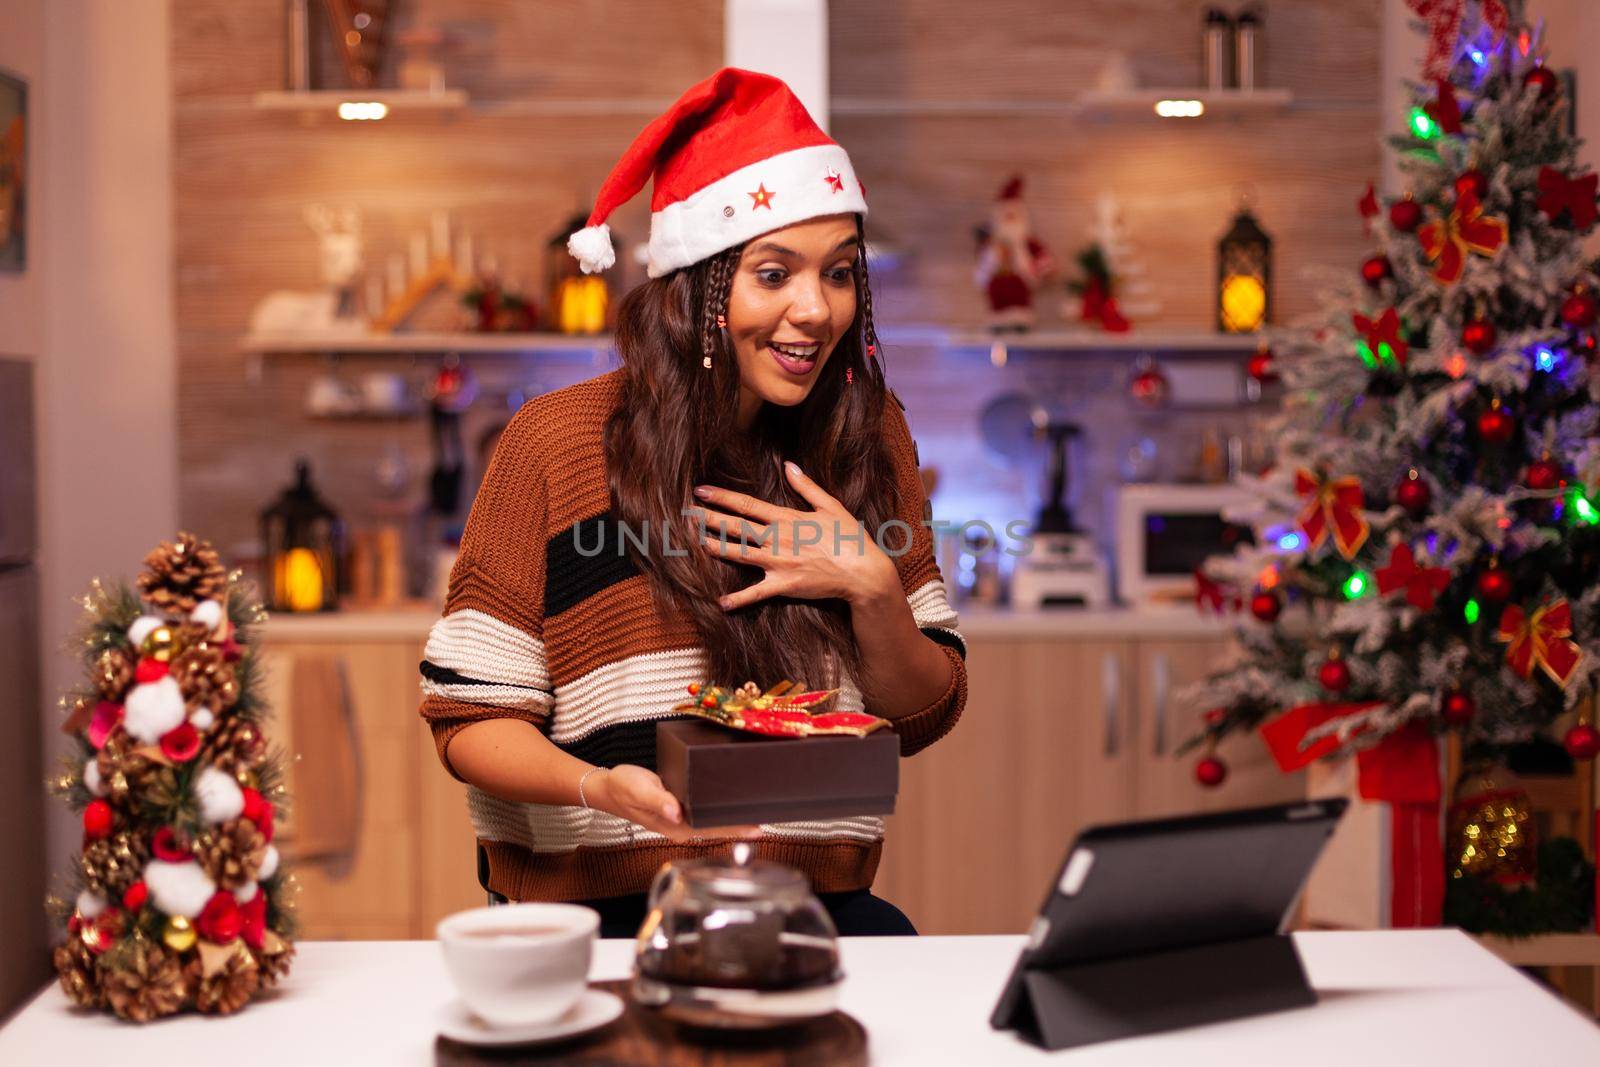 Happy woman using video call conference app on tablet giving virtual christmas present in festive home. Caucasian young person showing winter gifts with friends preparing for reunion